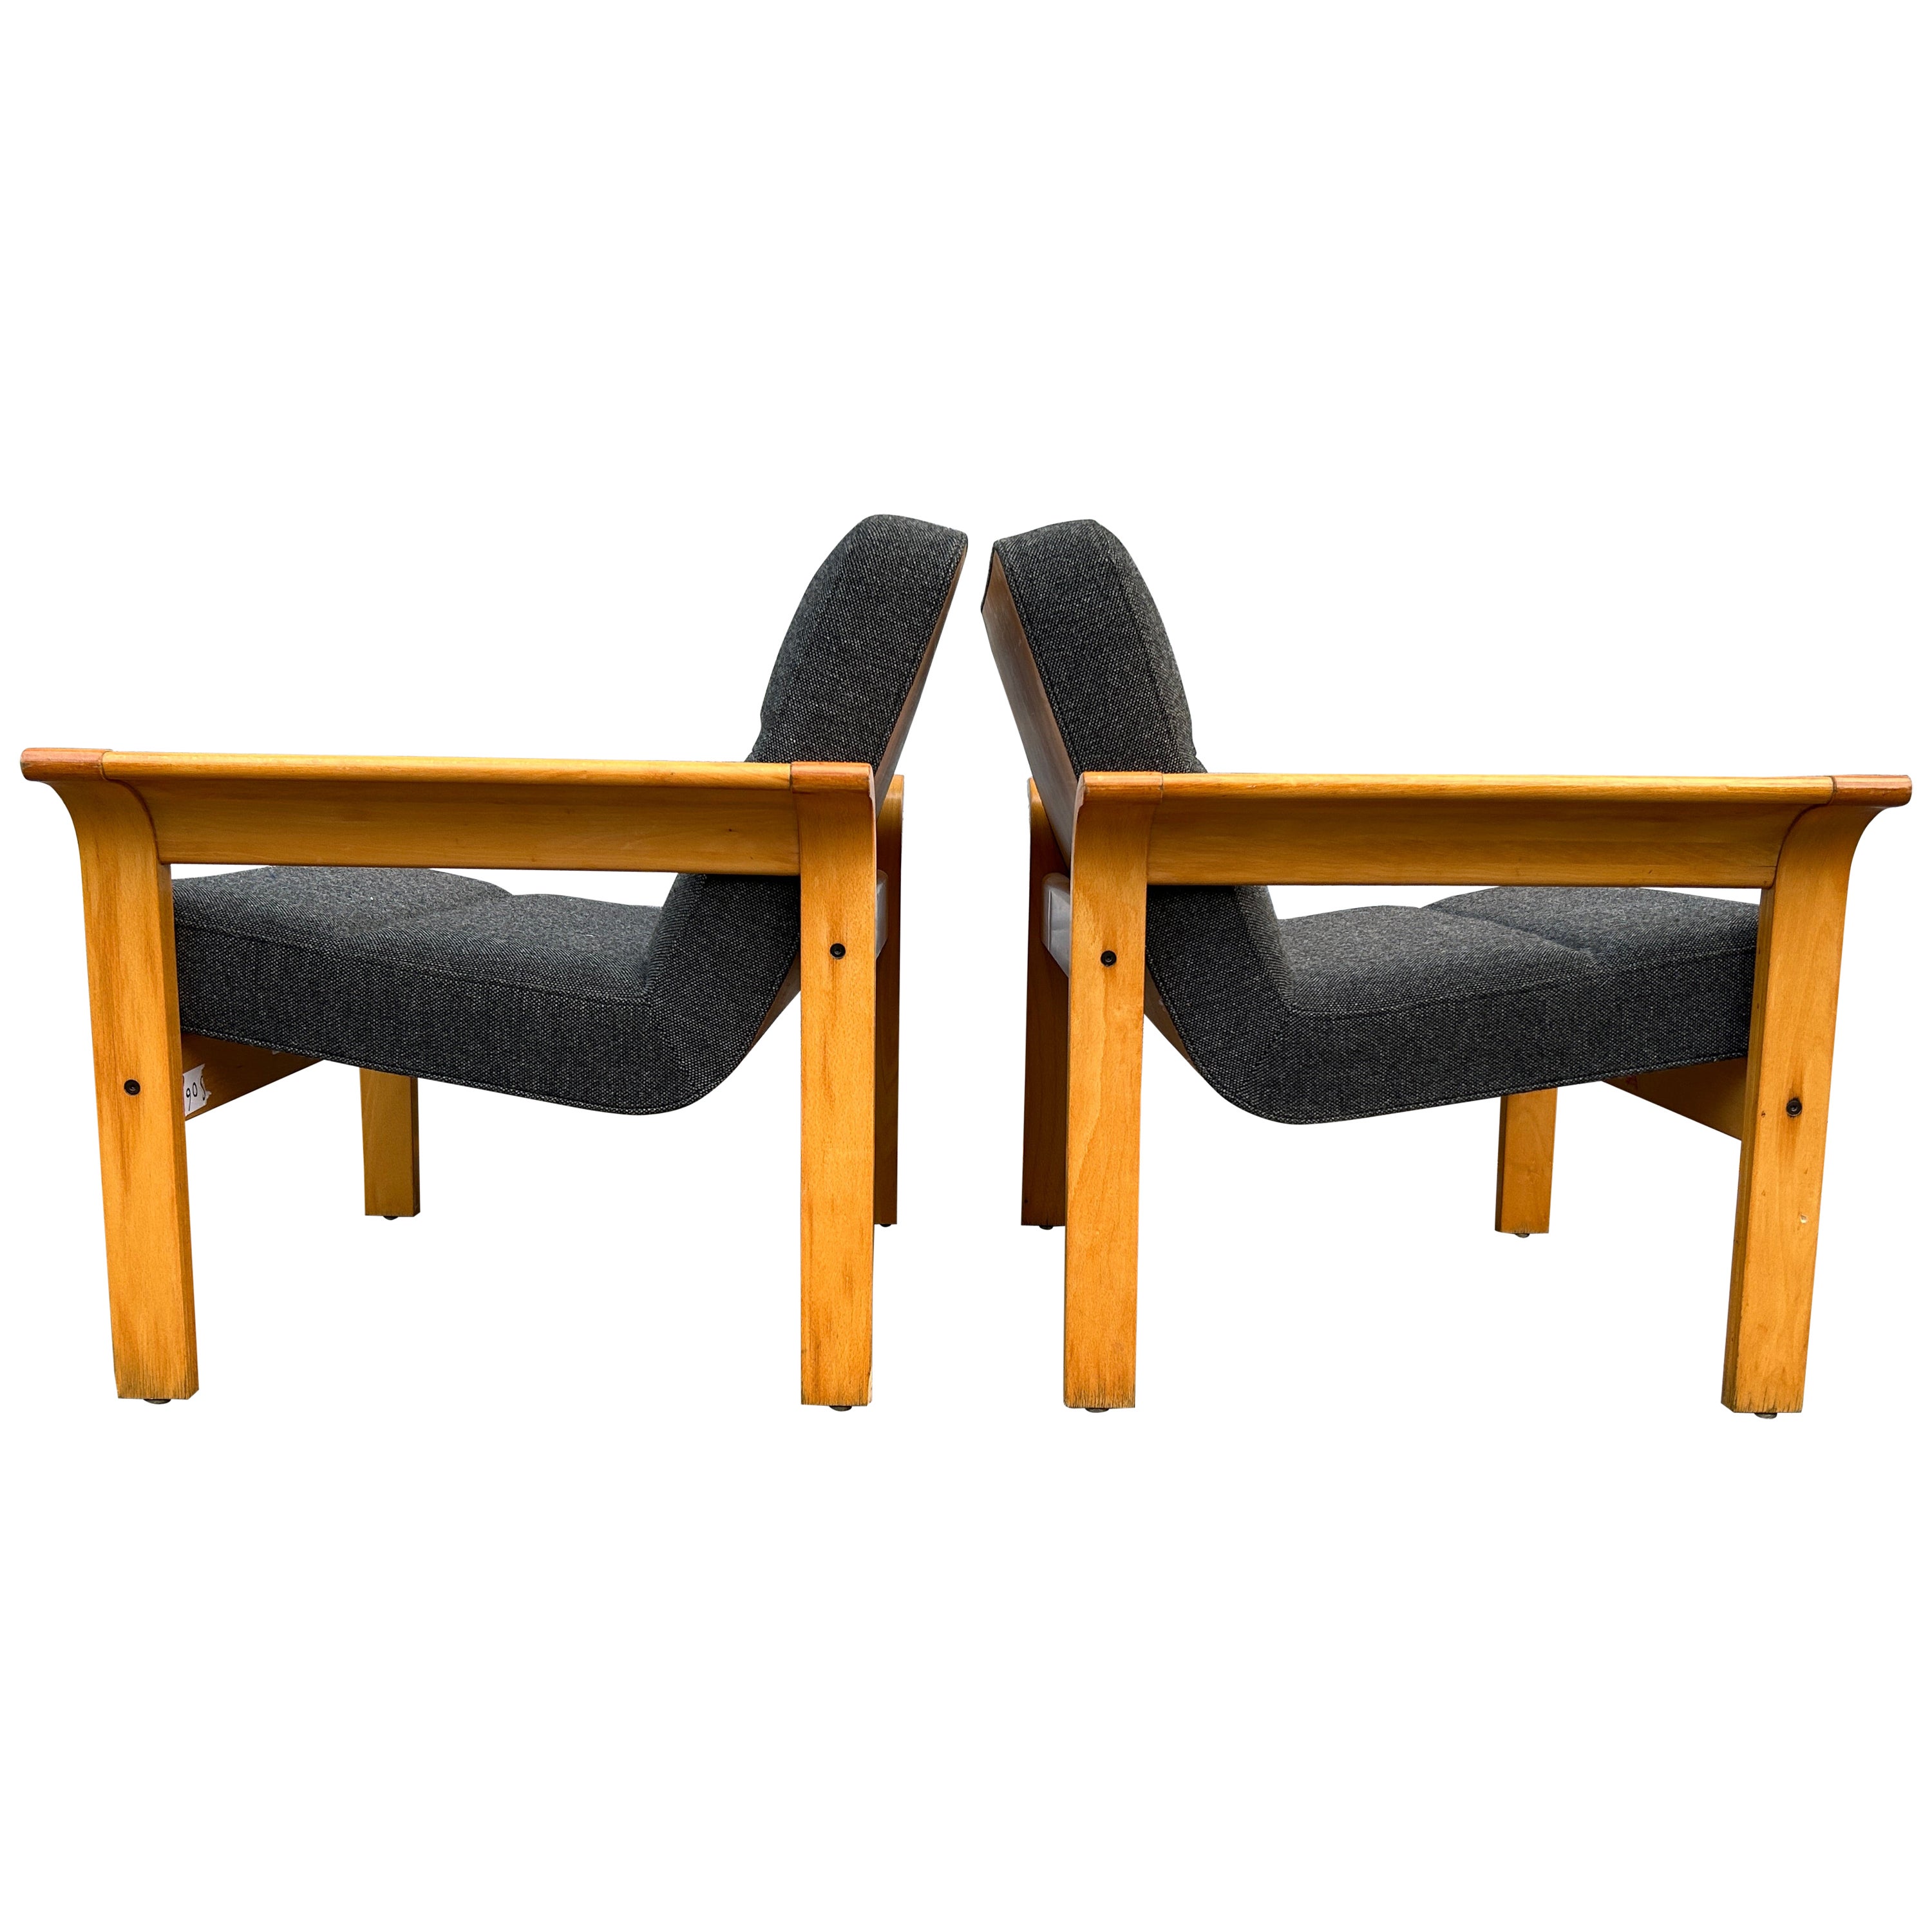 Pair of Danish modern Mid-Century Lounge Chairs Blonde Bentwood Arms 